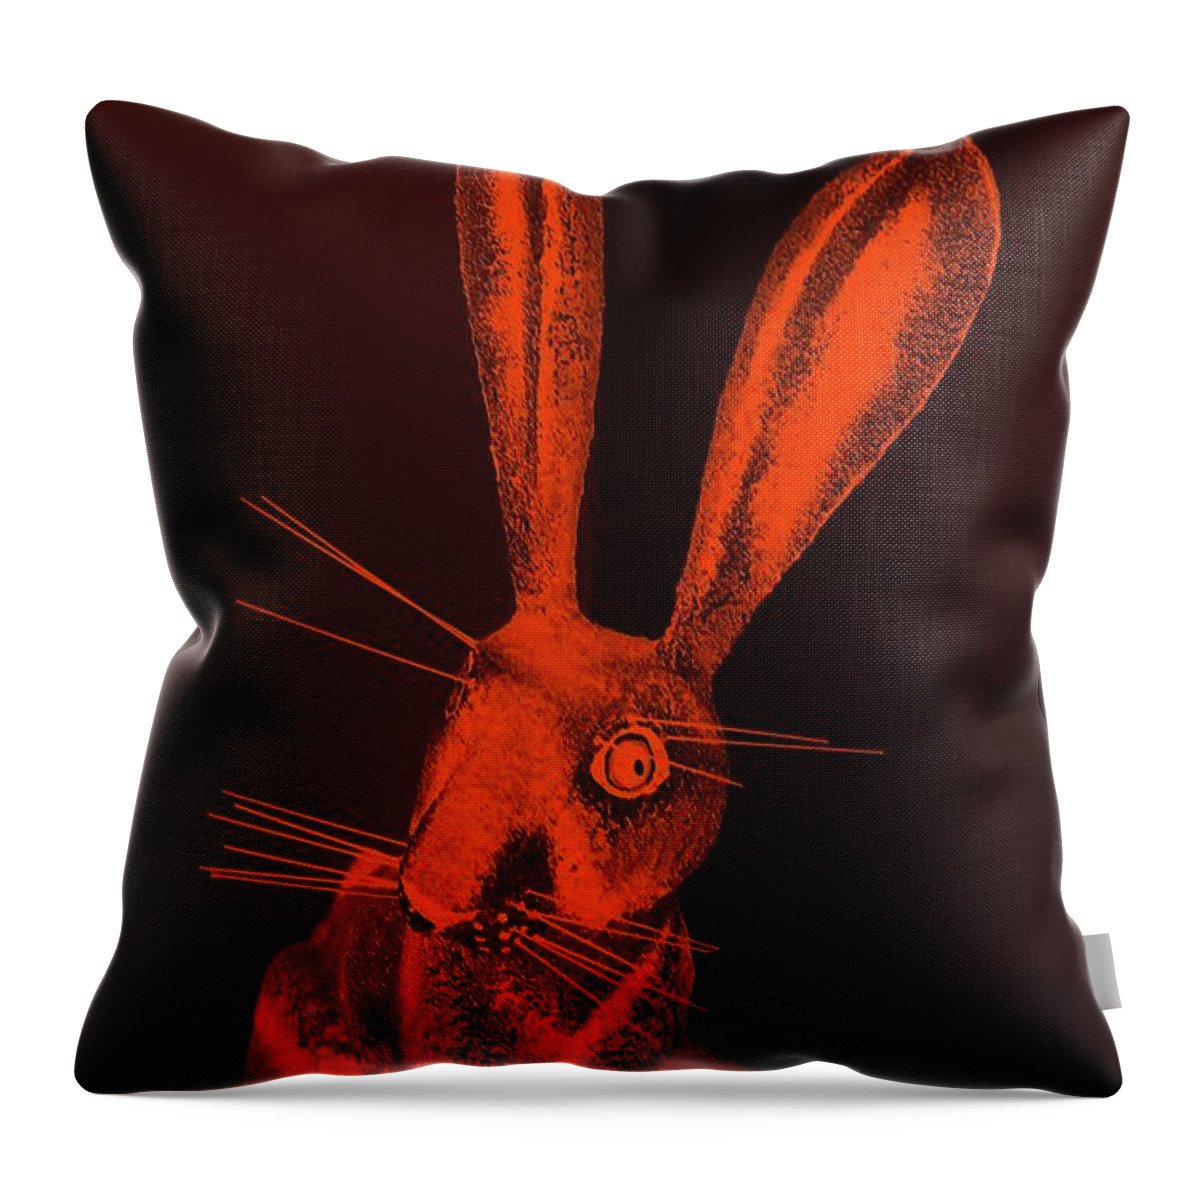 Rabbit Throw Pillow featuring the photograph Orange New Mexico Rabbit by Rob Hans